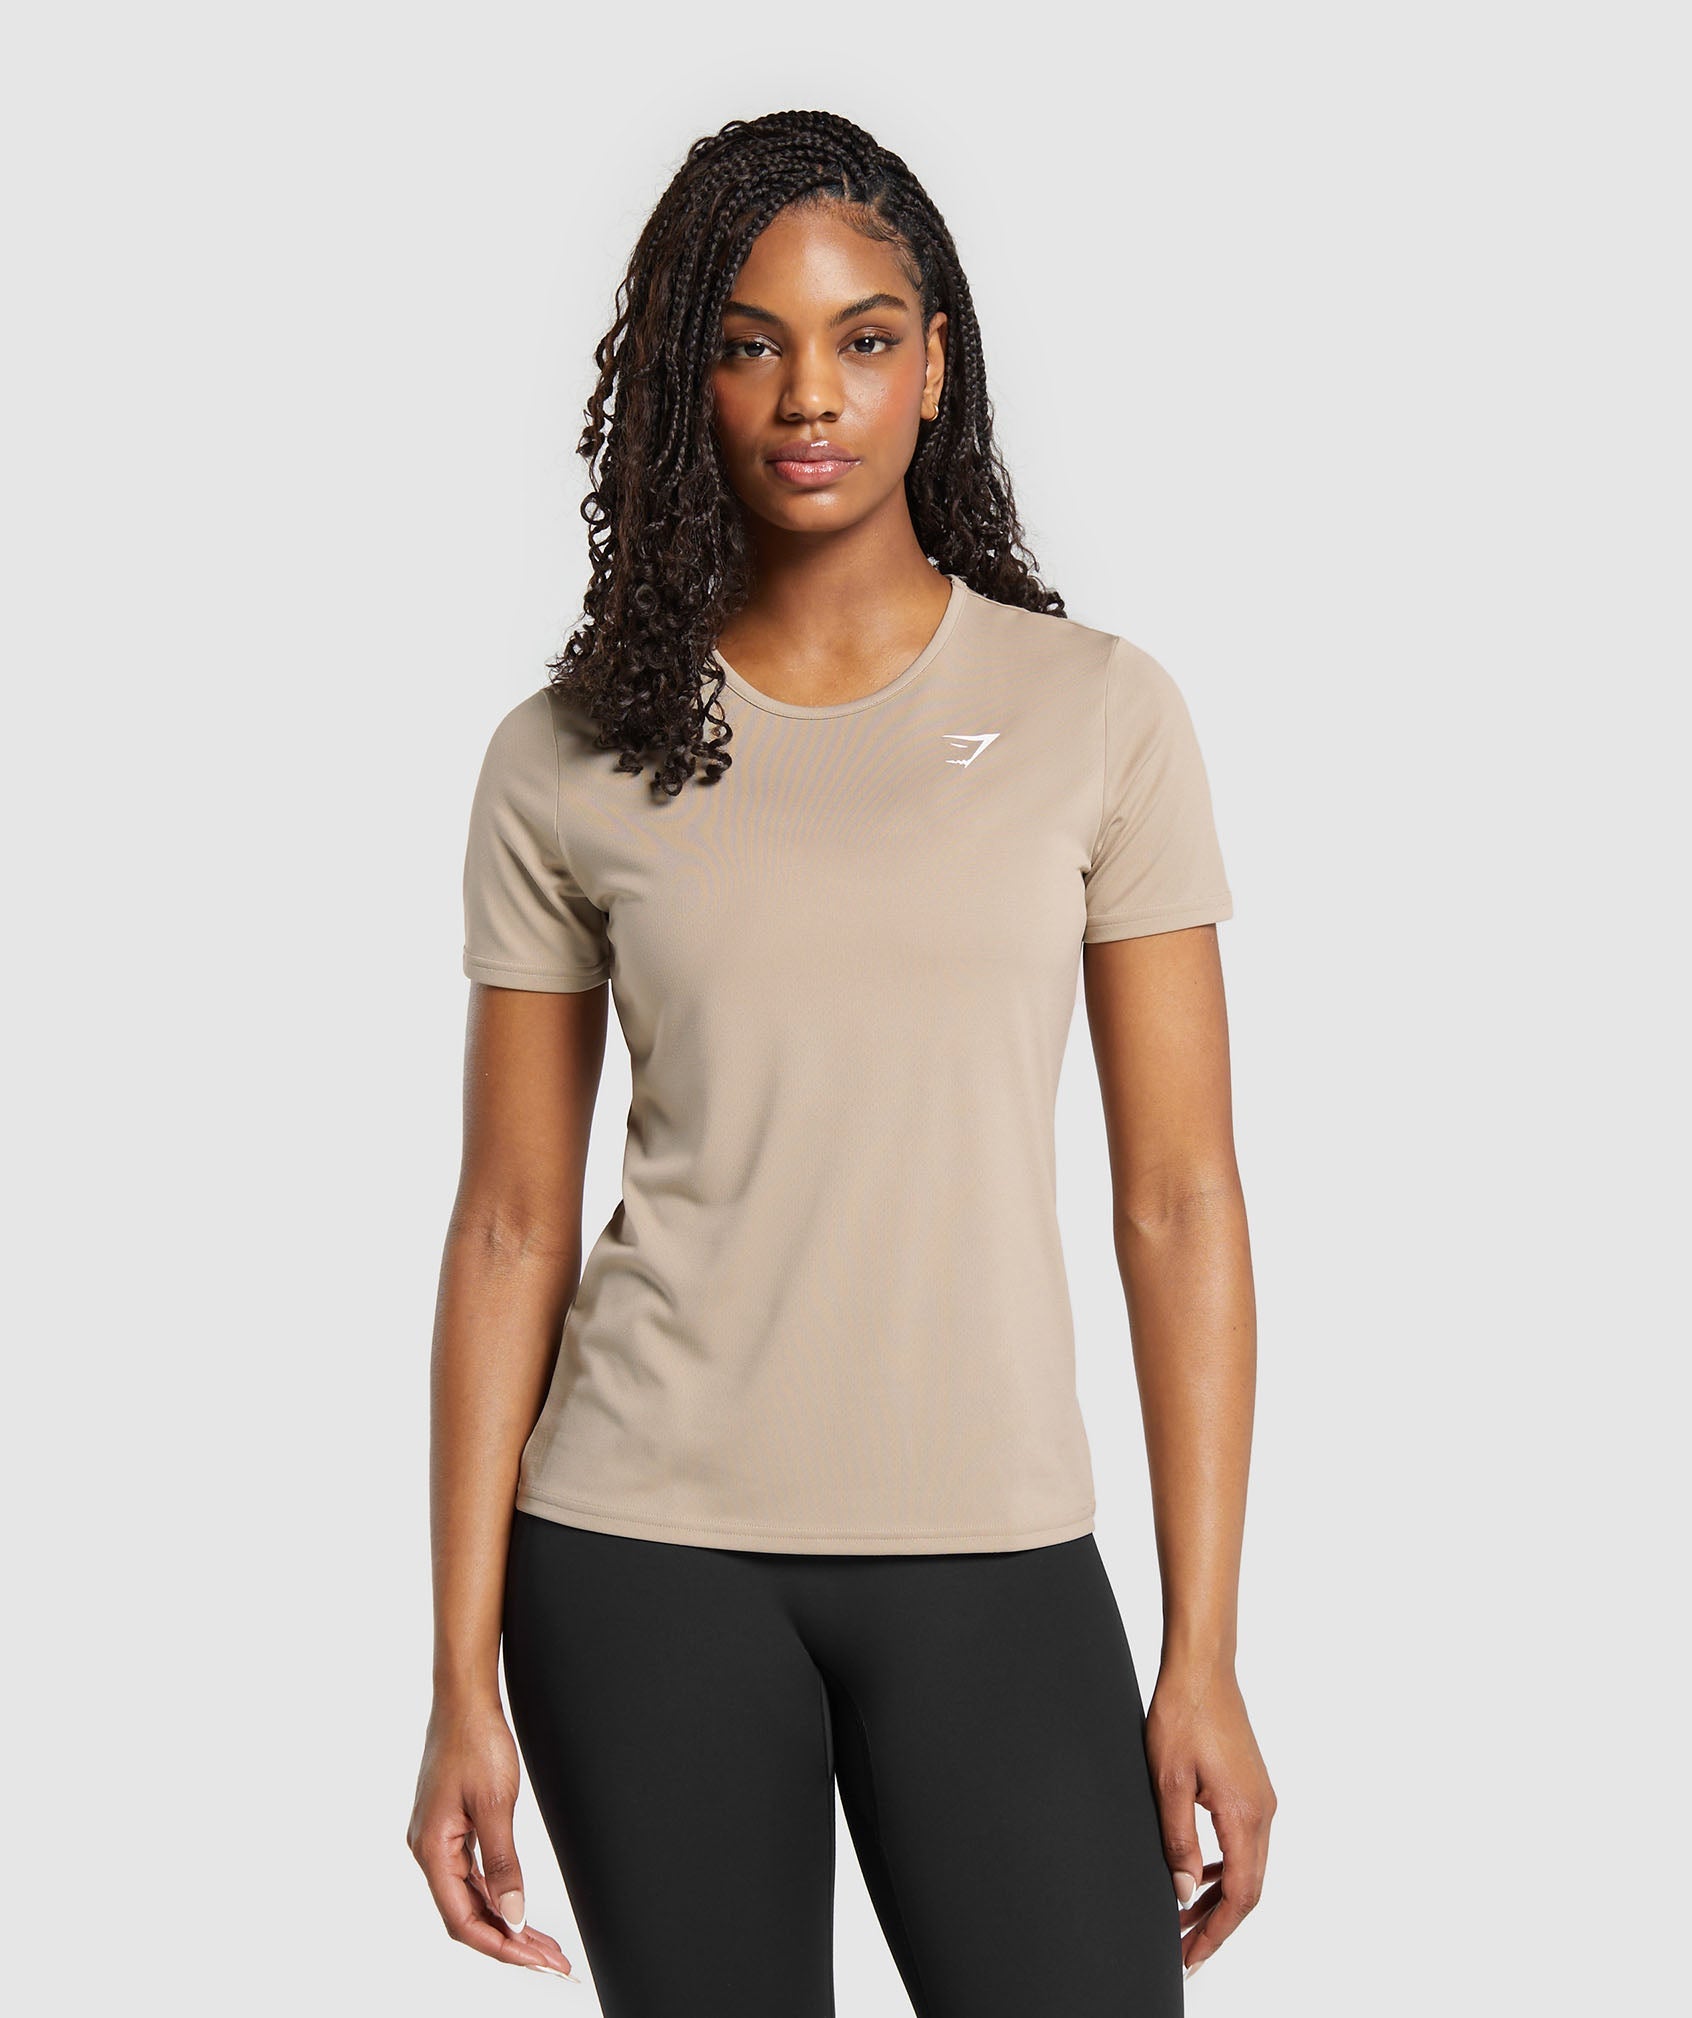 Training T-Shirt in Sand Brown - view 1